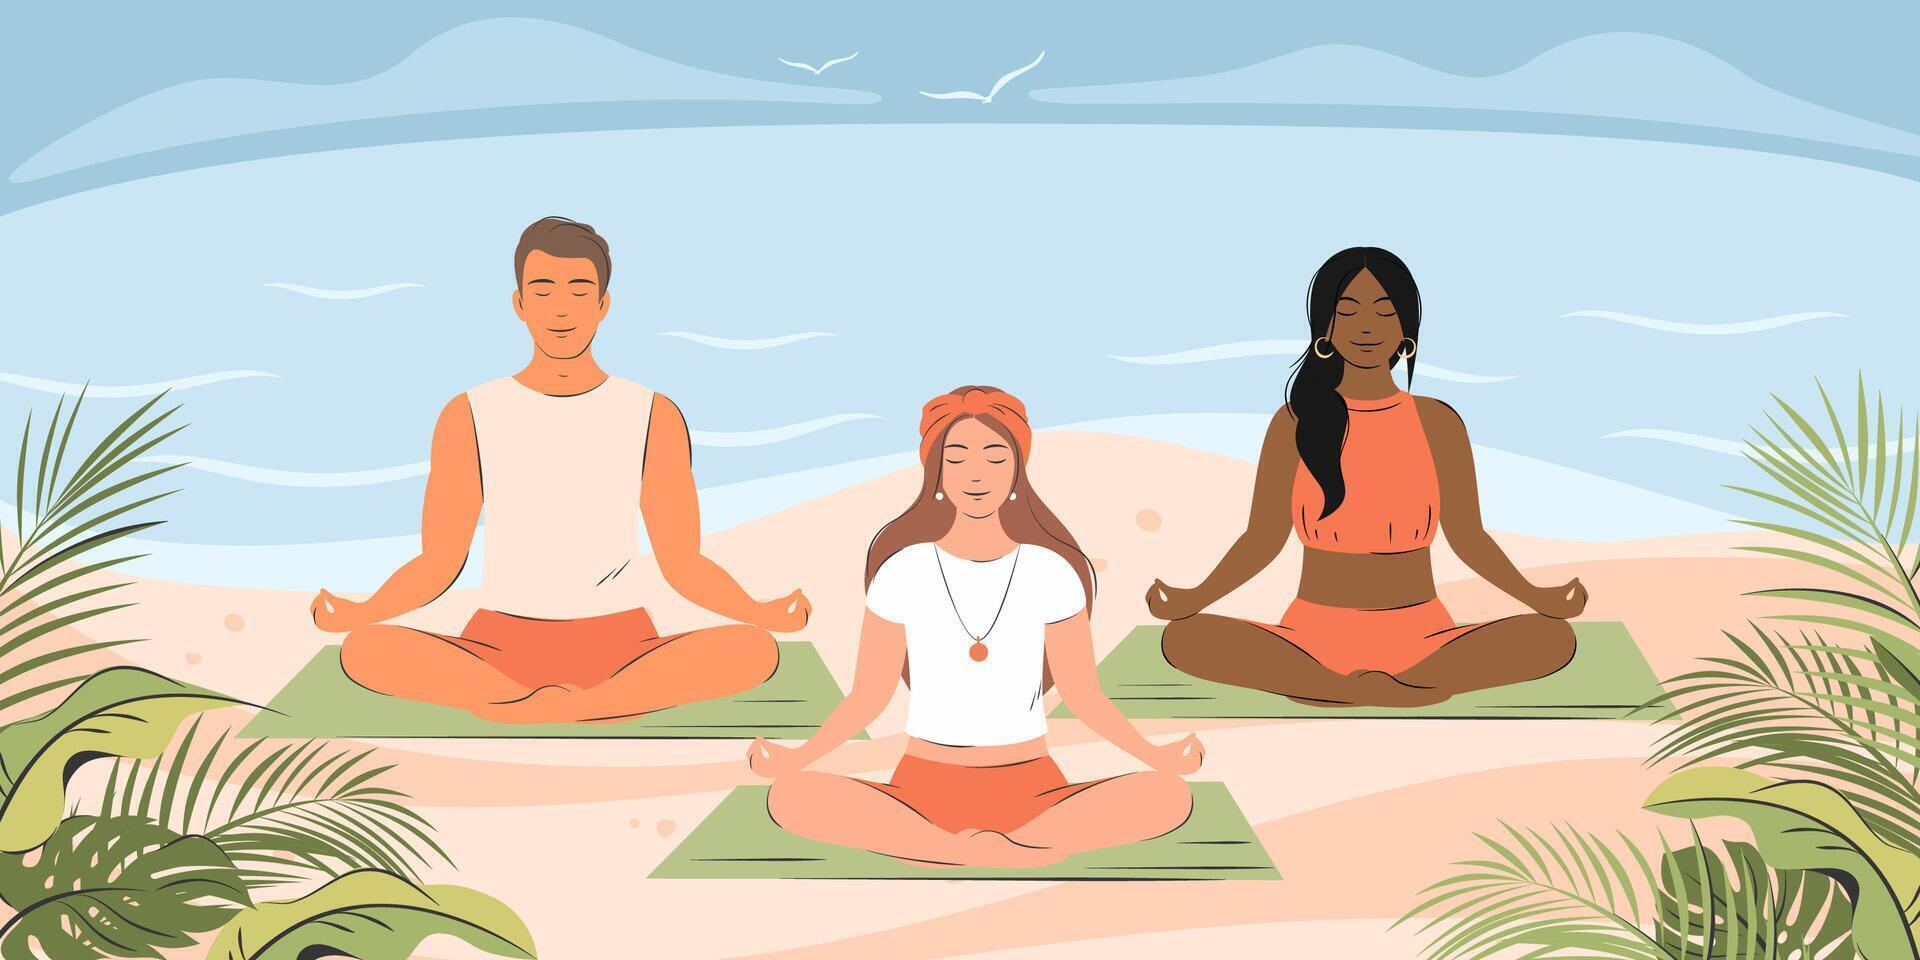 Different People practicing yoga together and meditating on sandy beach. Healthy lifestyle, active recreation outdoors, open air workout, physical exercising, yoga class. Flat vector illustration